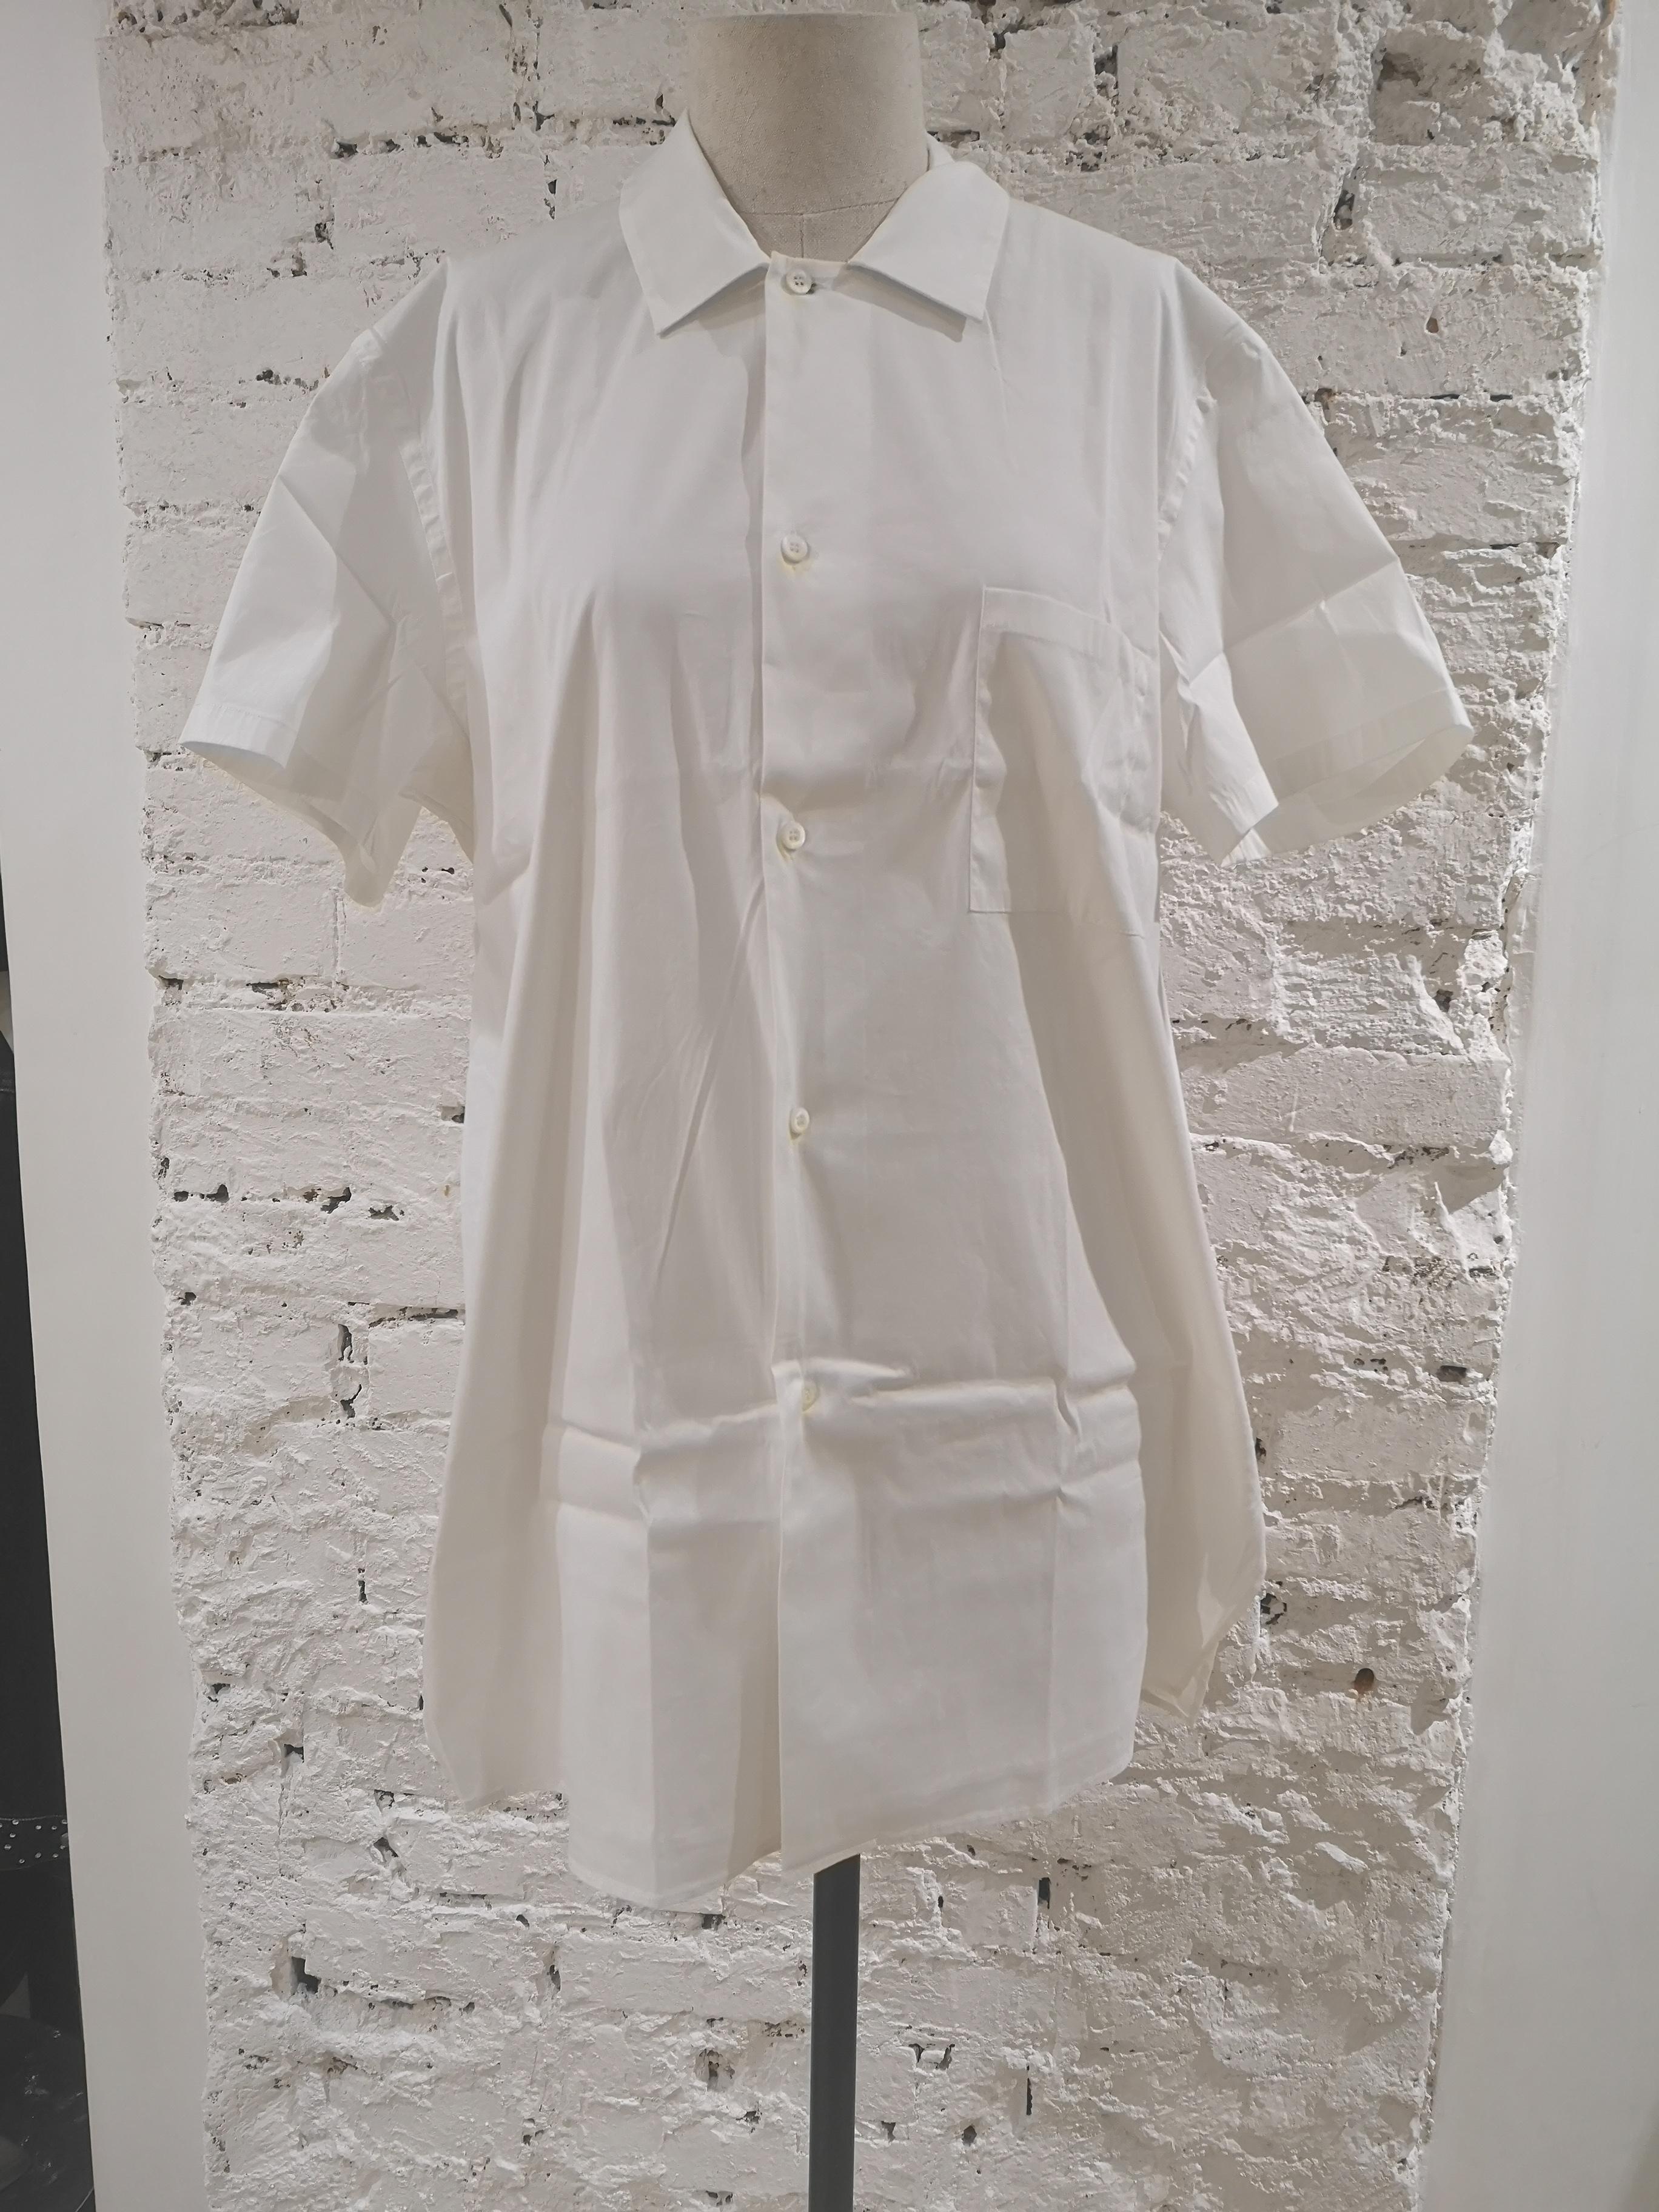 Prada white cotton shirt 
totally made in italy in size 44